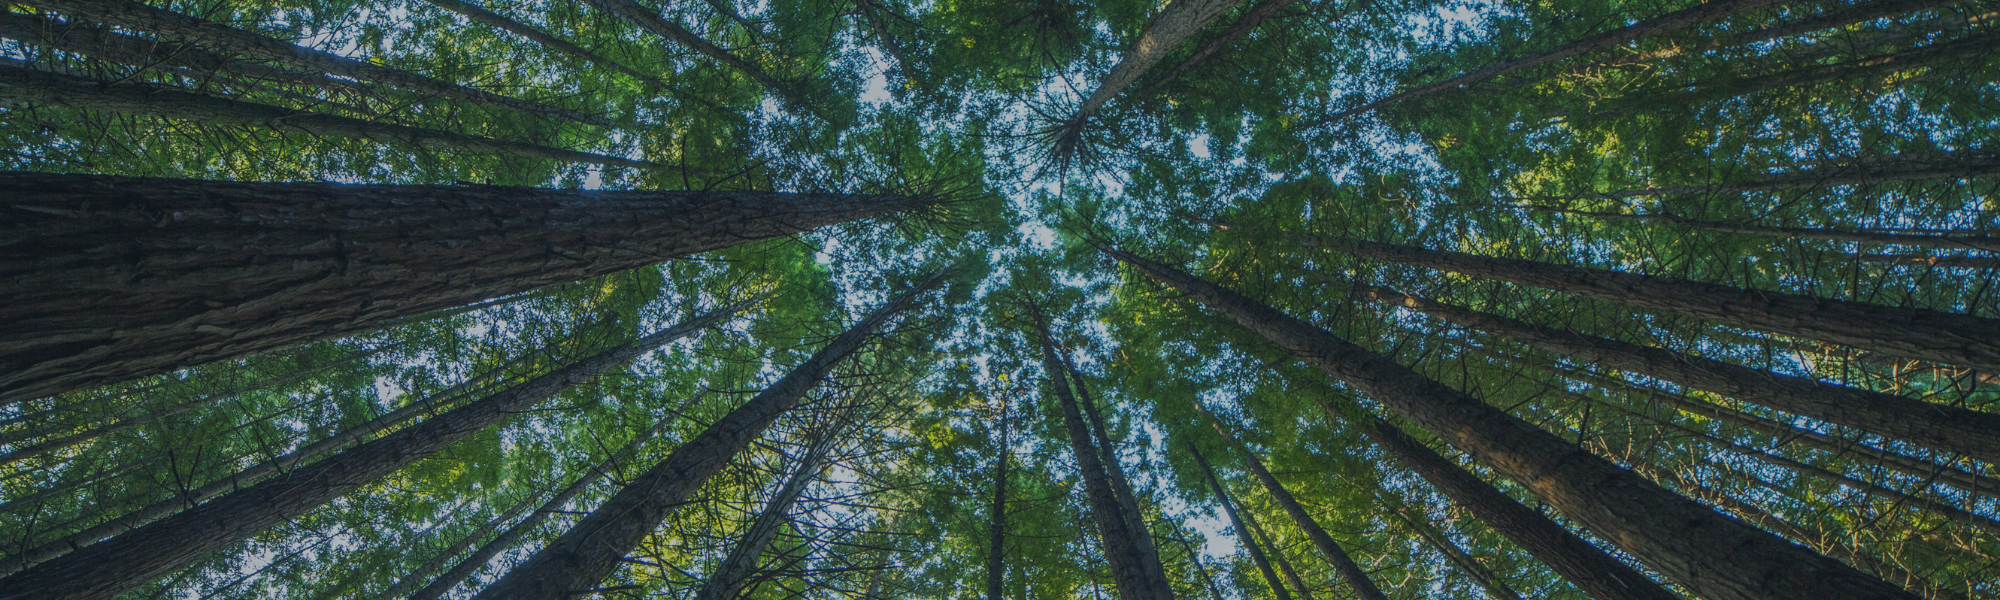 sky view of trees in a forest 